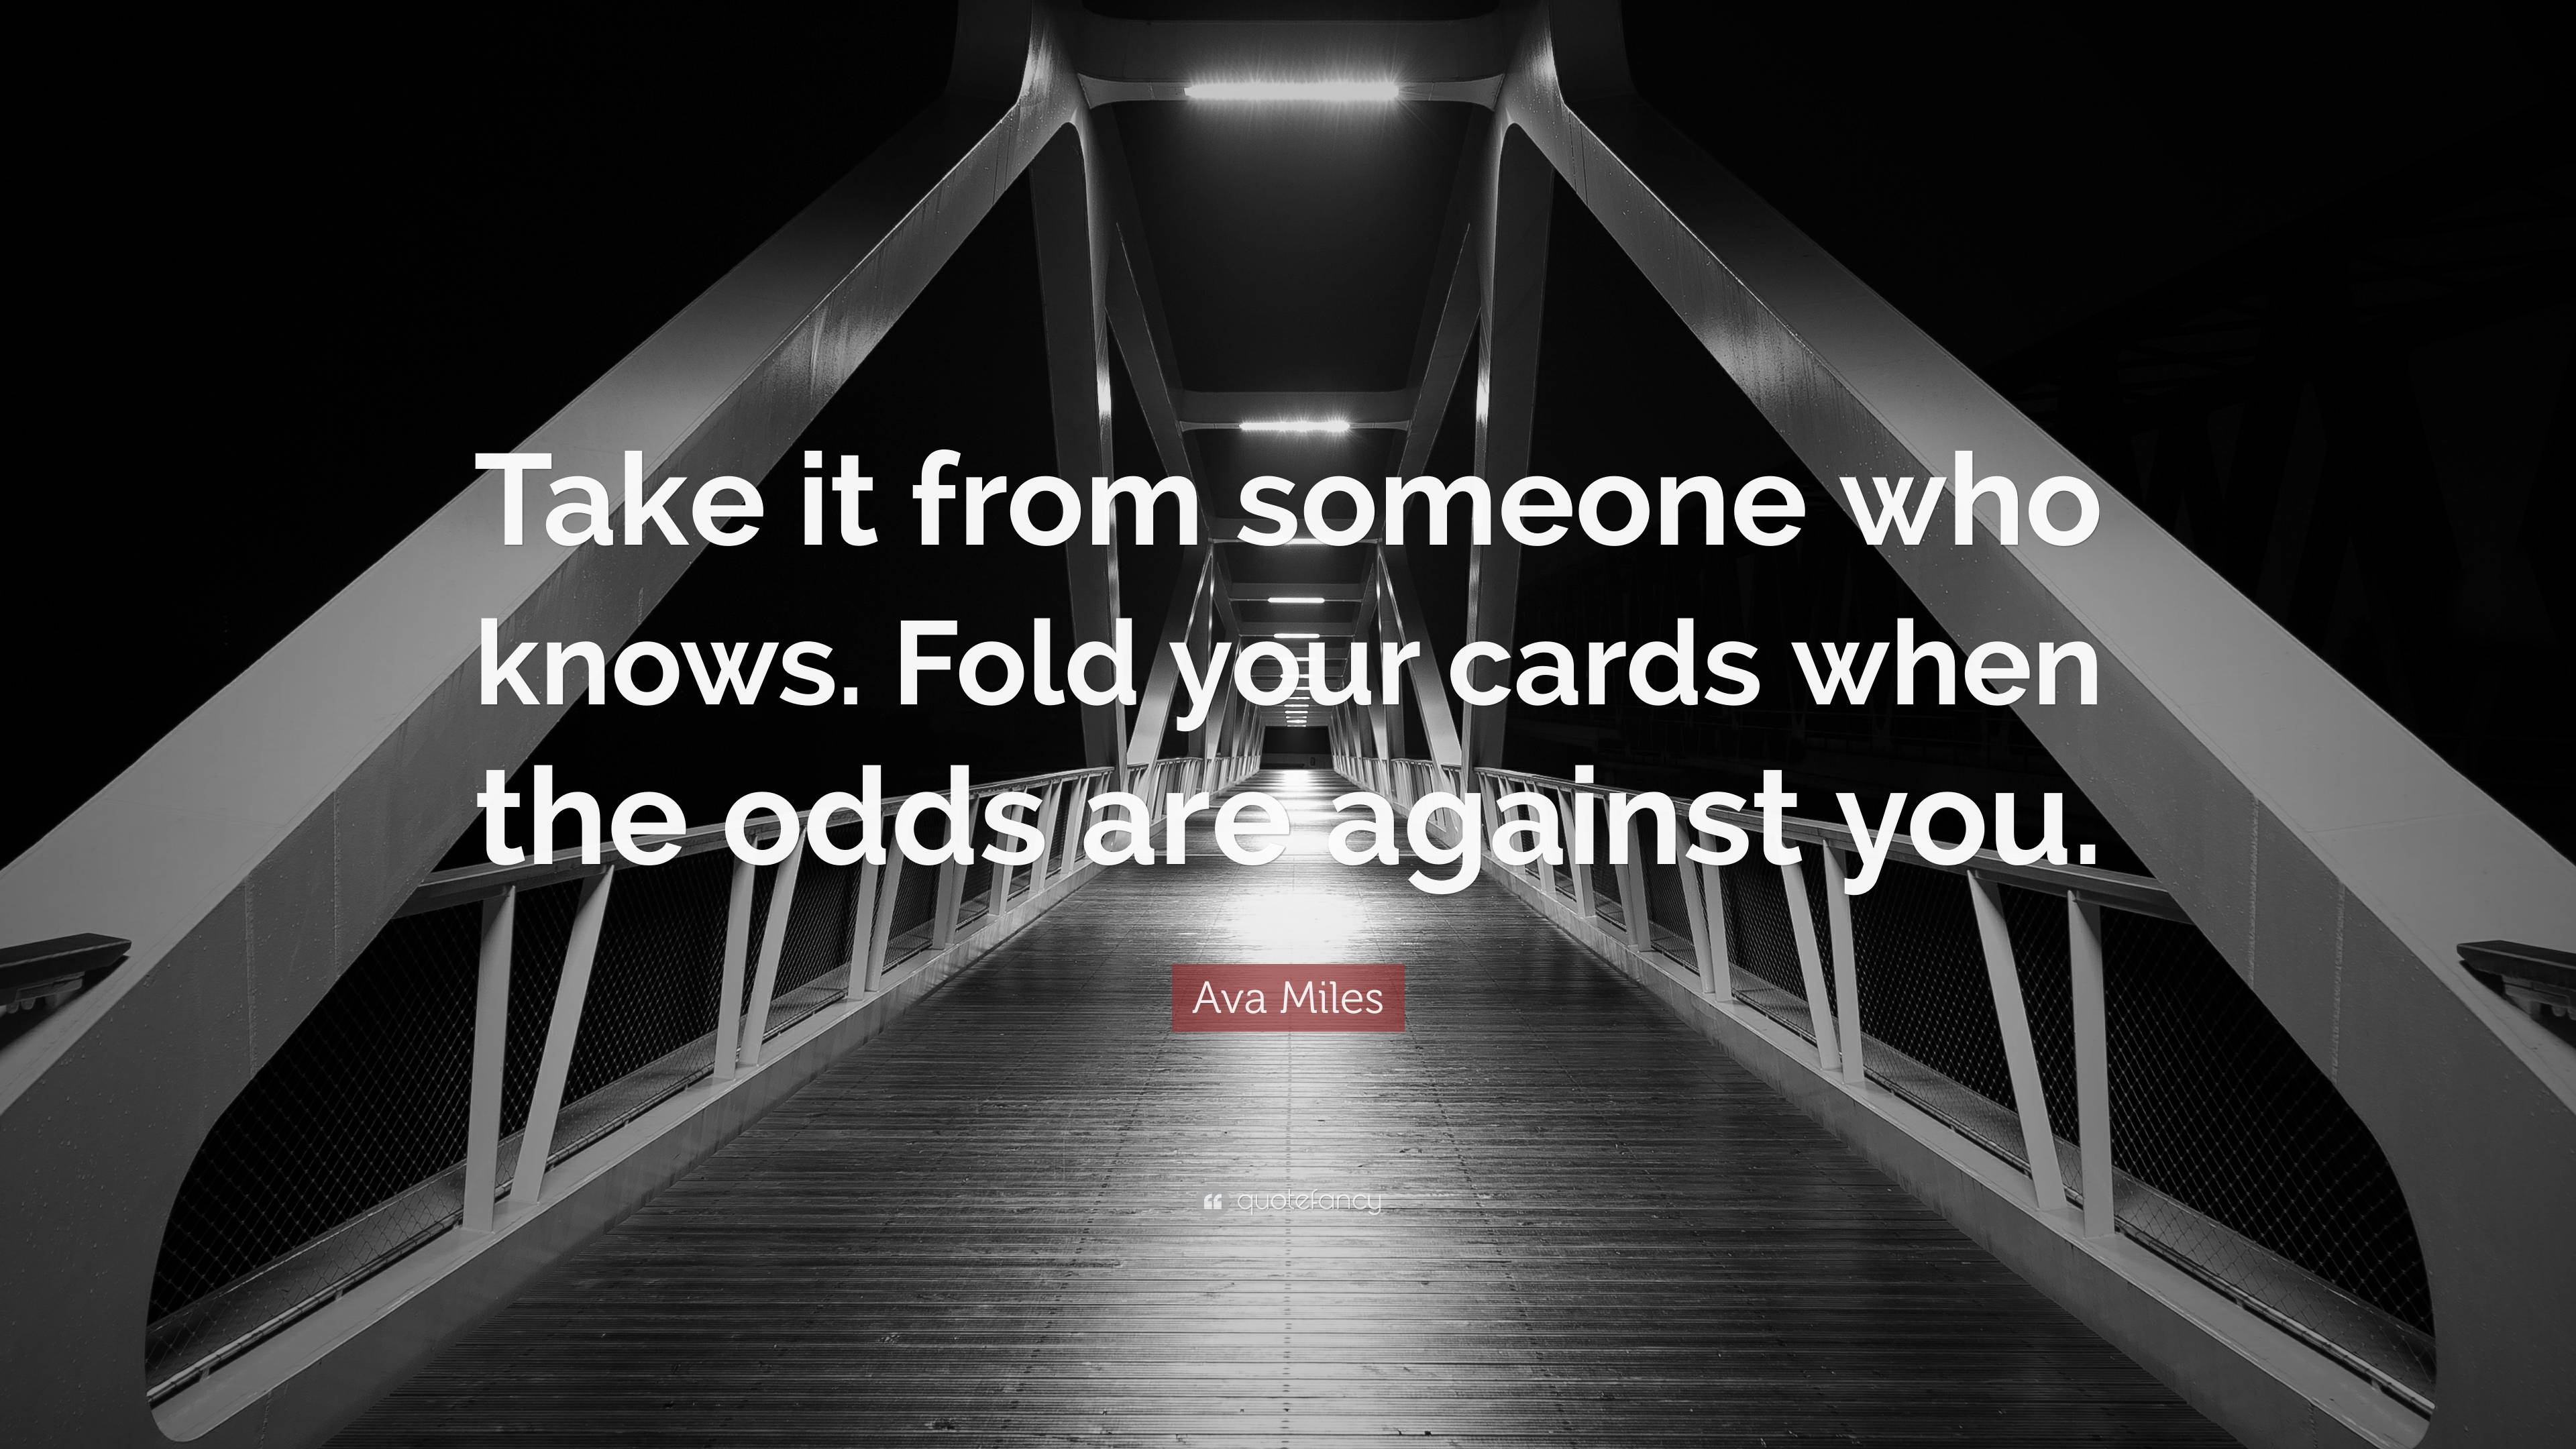 Ava Miles Quote: “Take it from someone who knows. Fold your cards